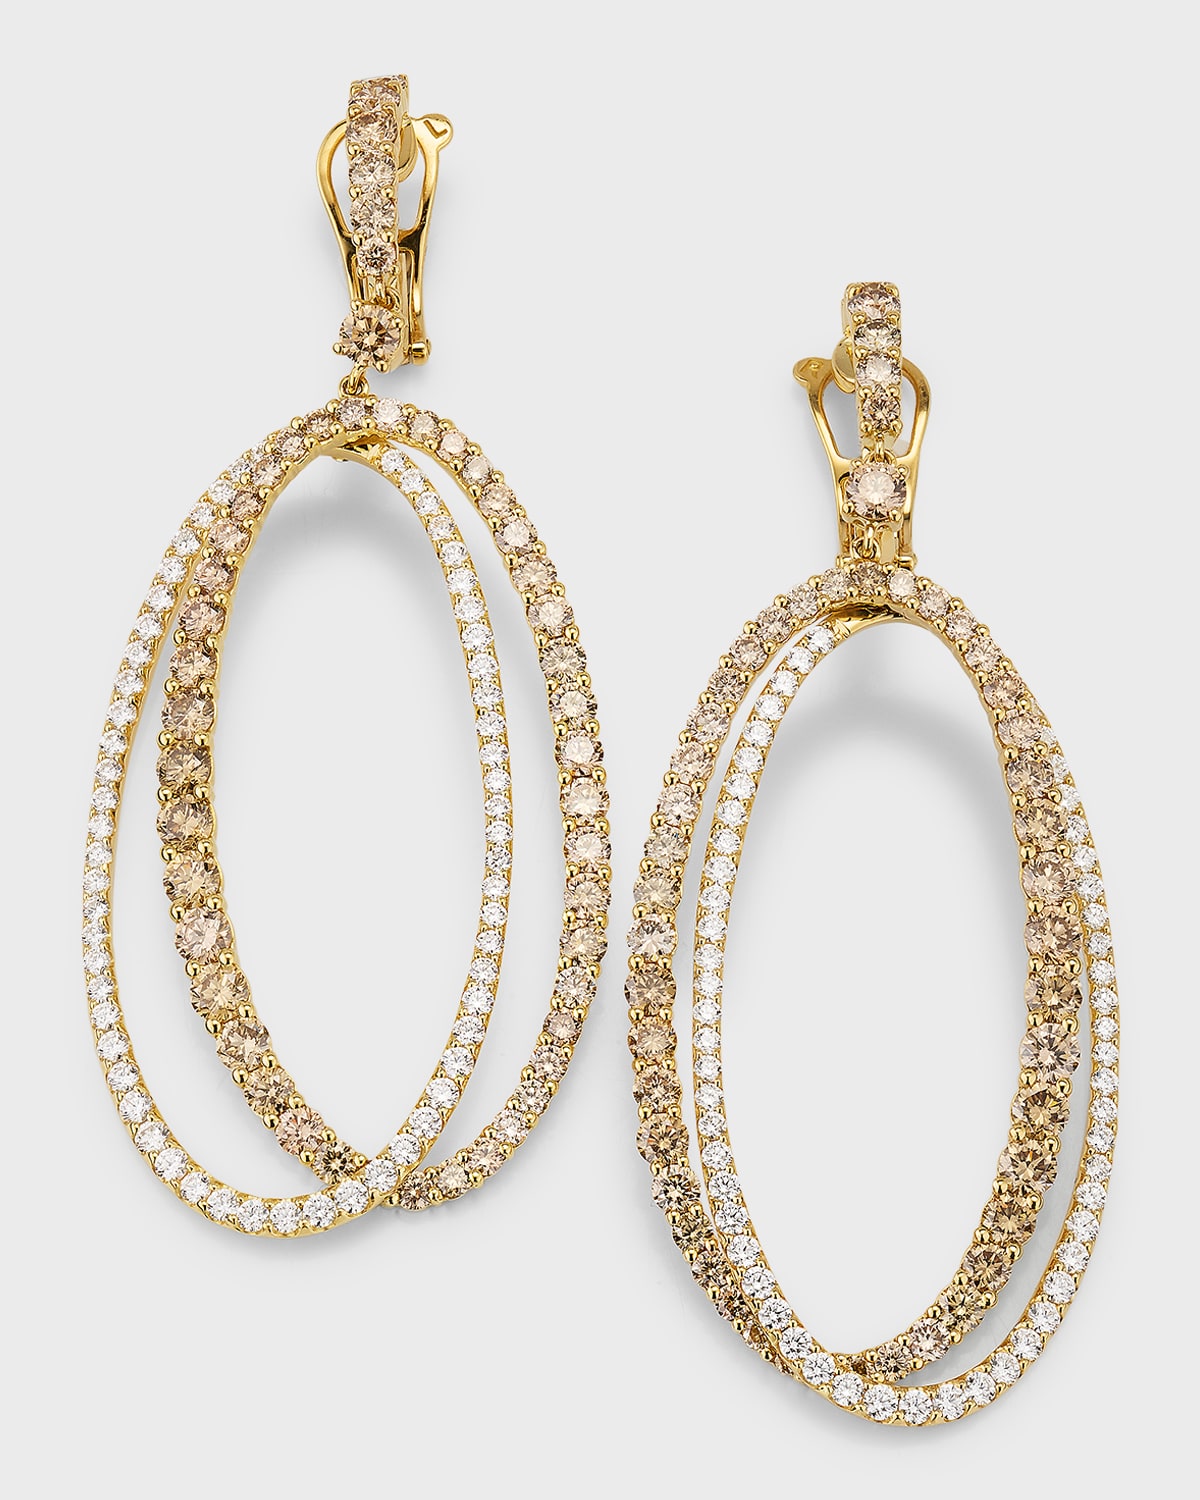 18K Yellow Gold Double Oval Drop Earrings with Brown and White Diamonds